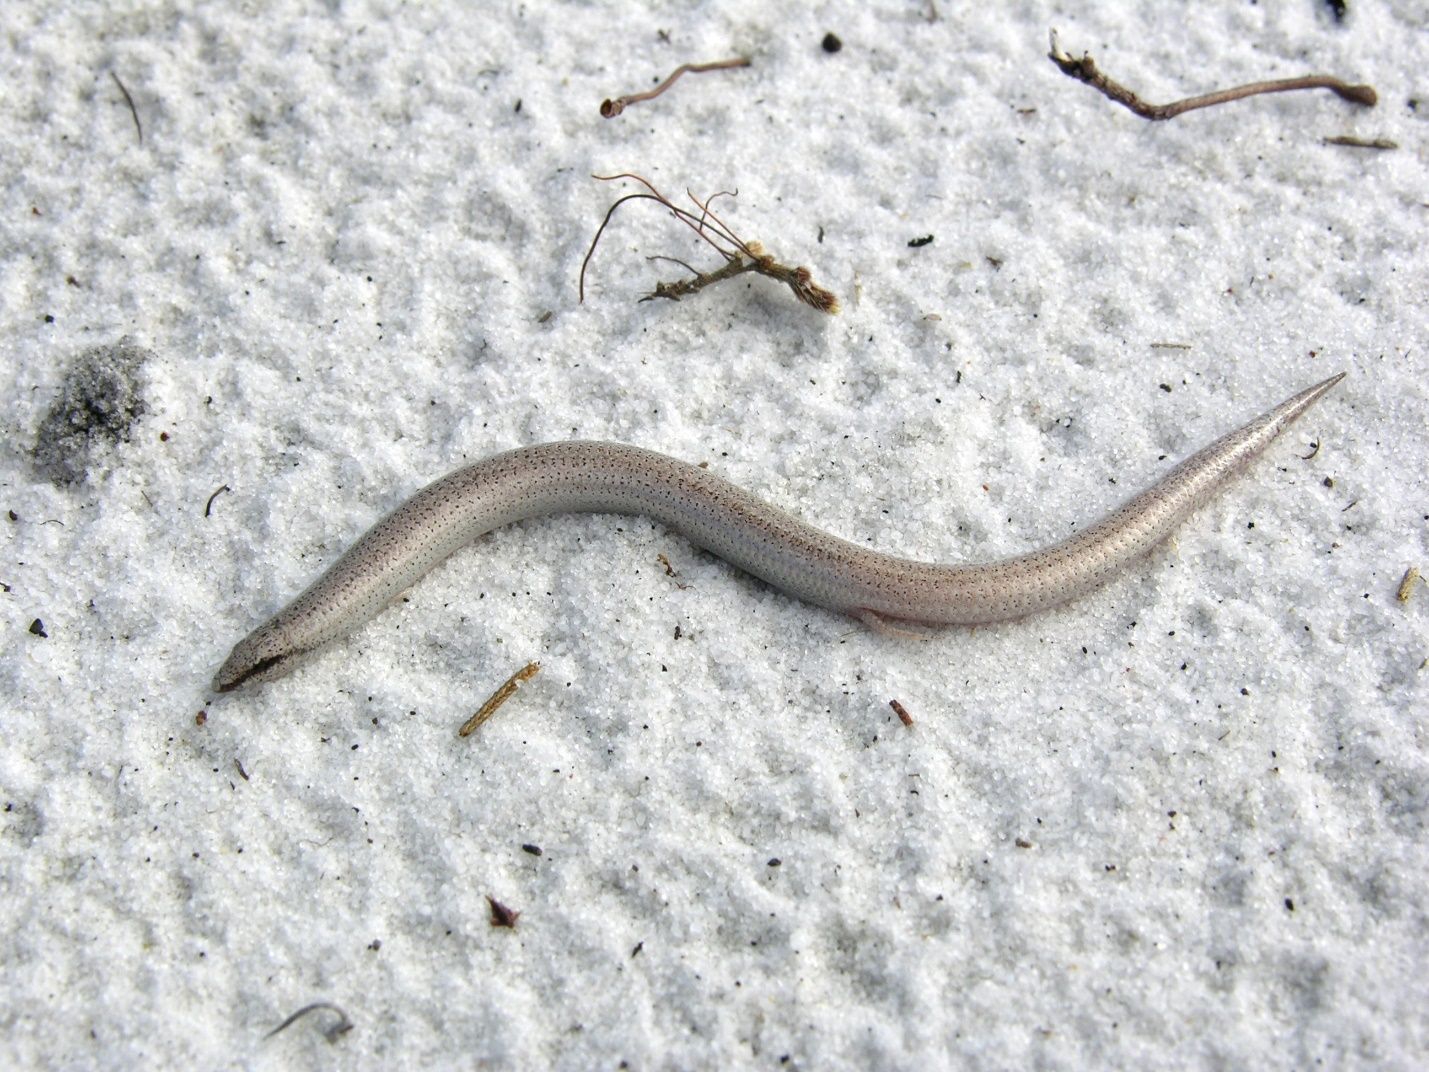 Roads may act as barriers to movement for some species of wildlife, such as this sand skink. 